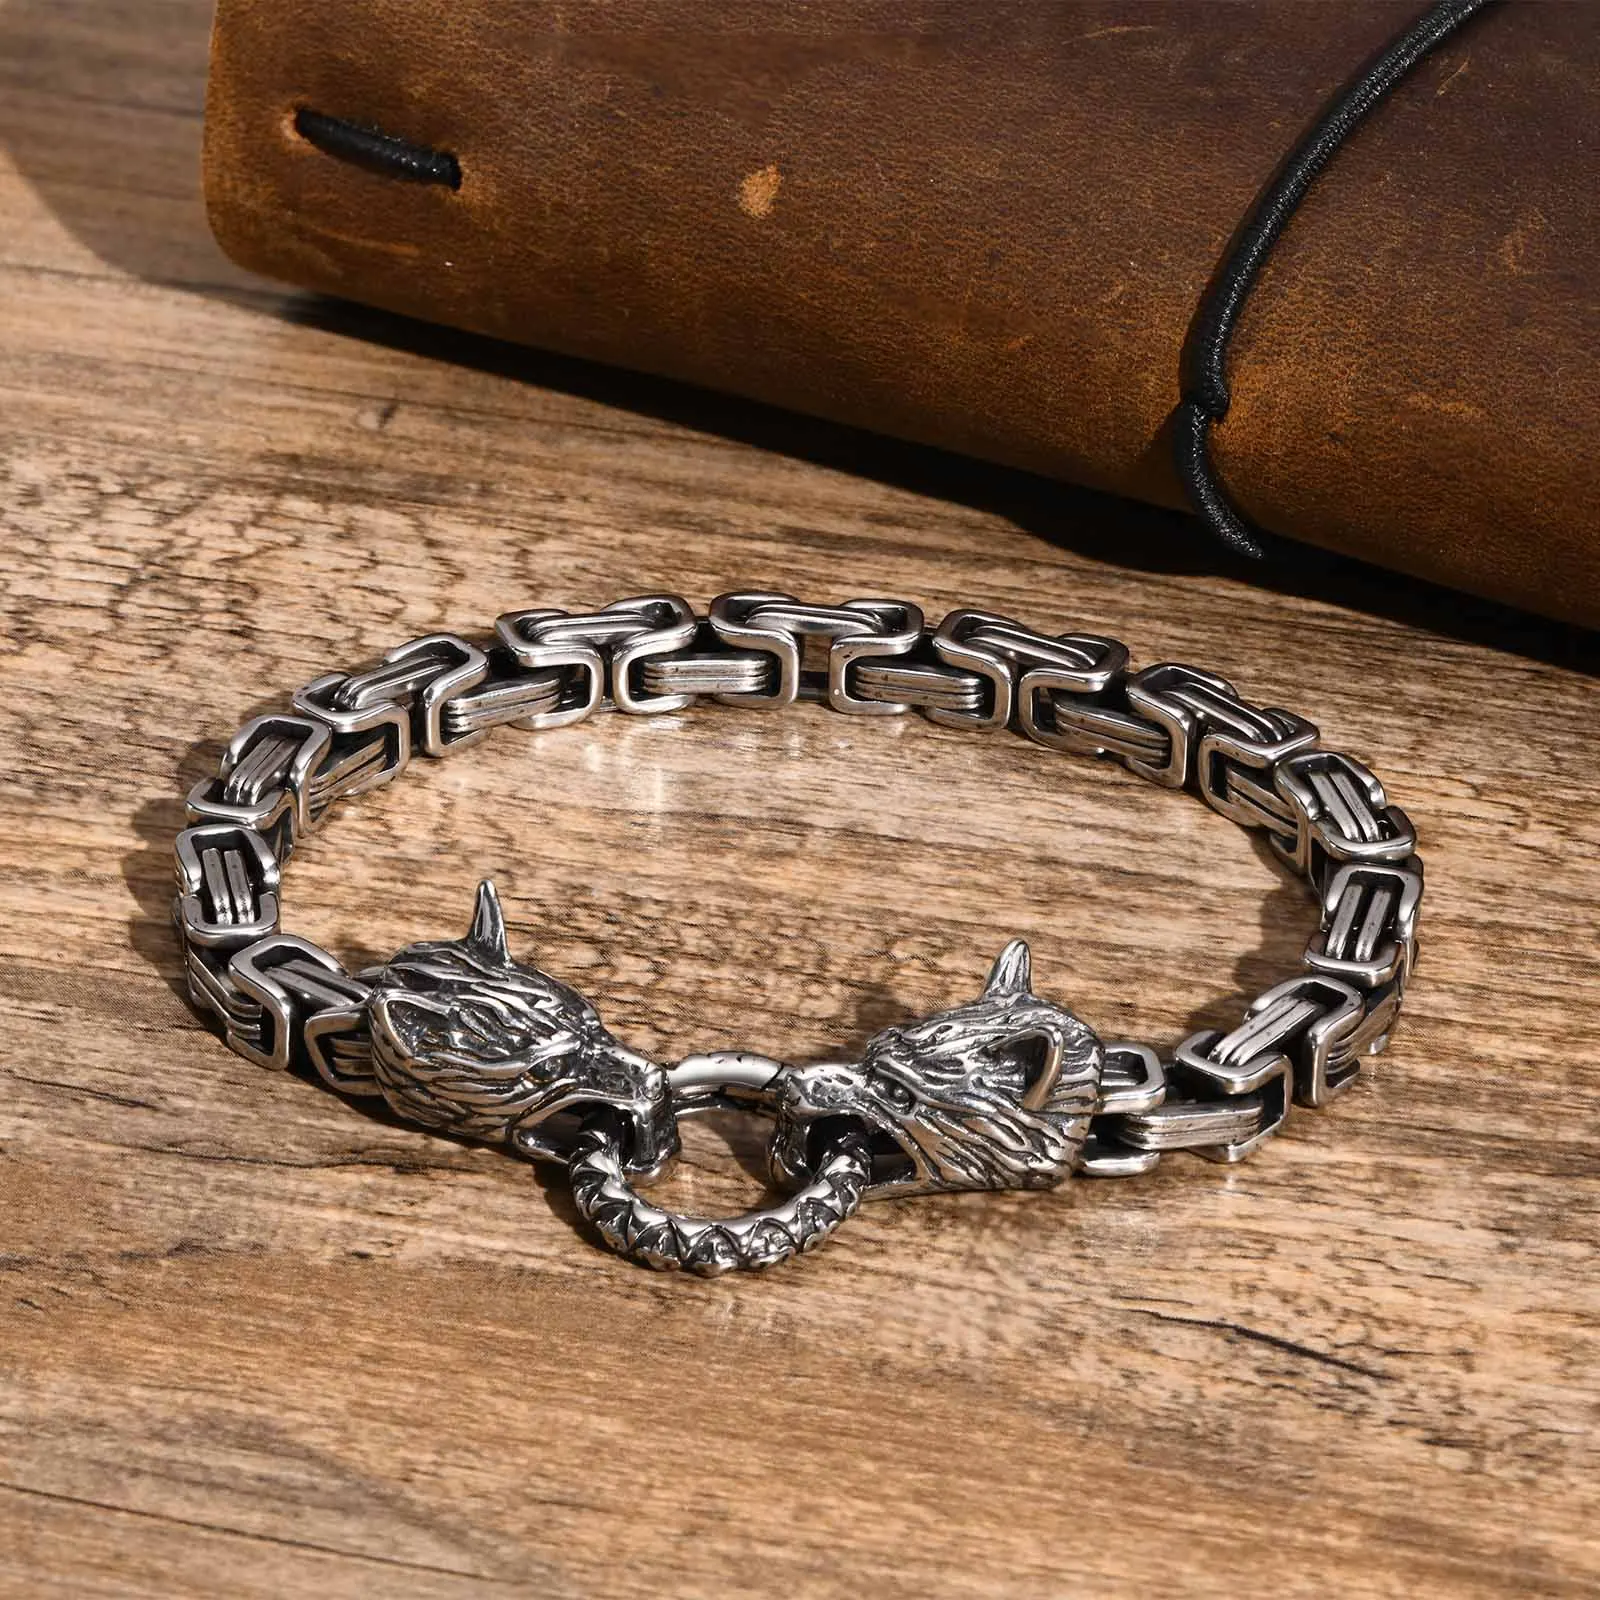 

Double Wolf Head Charm Chain Bracelets for Men, Rock Punk 6MM Wide Byzantine Link Wristband, Cool Gothic Viking Gift Jewelry